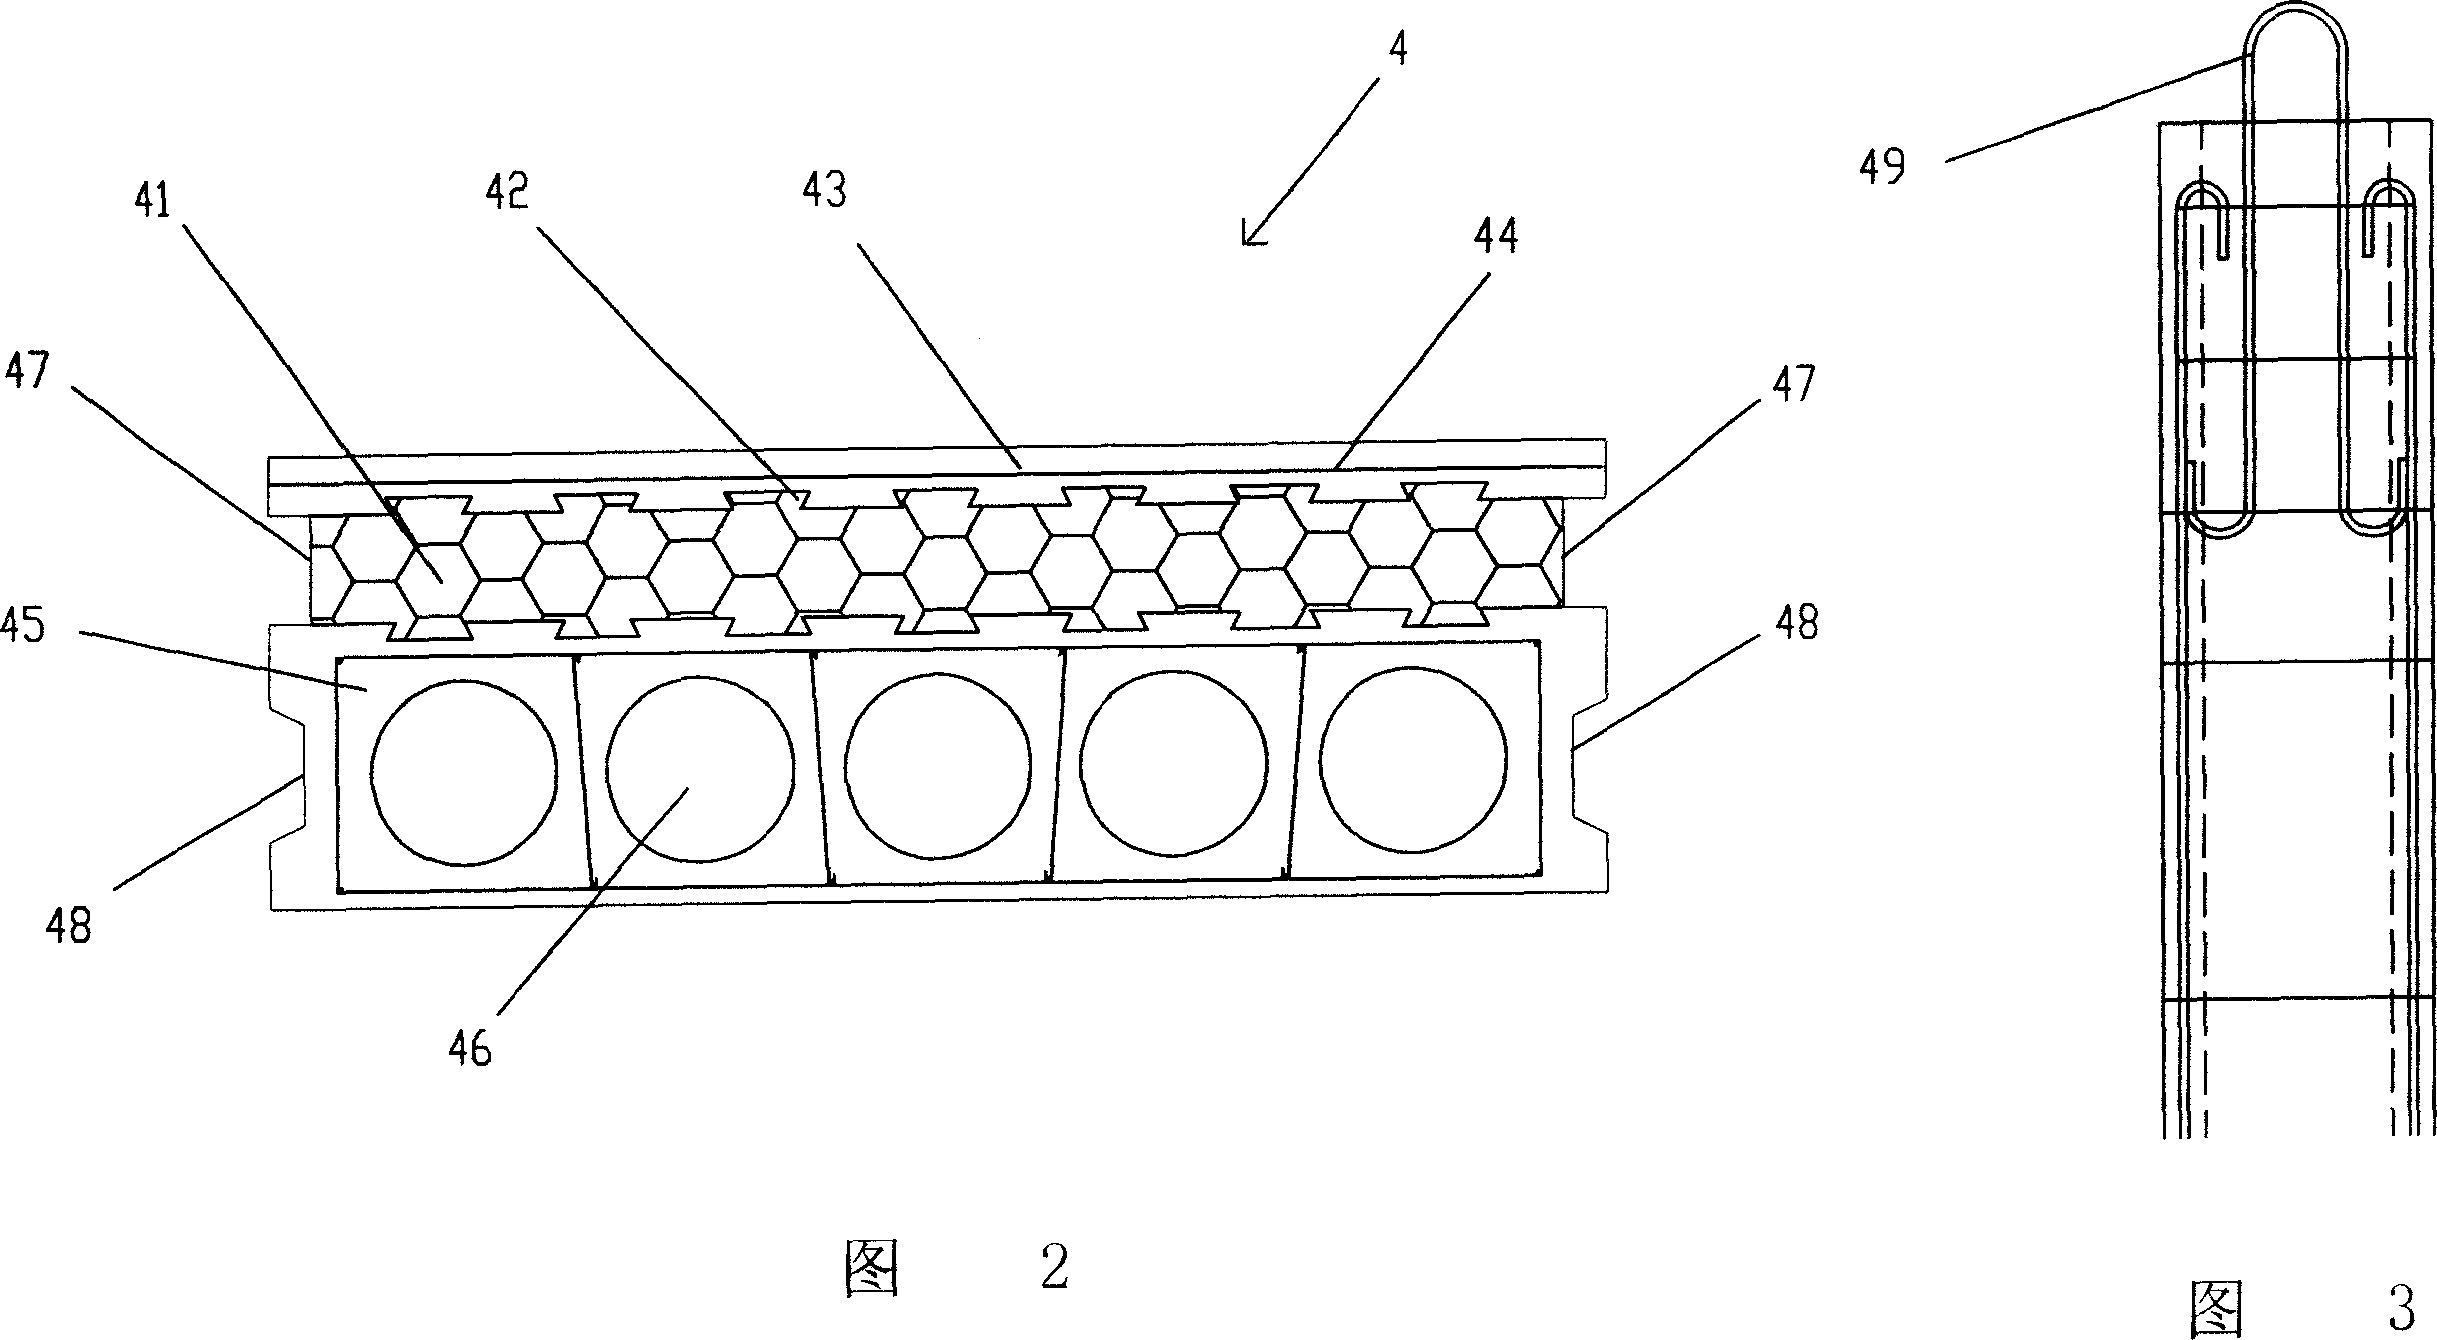 Architectural structure system of preformed hollow load-bearing wall panel and construction method